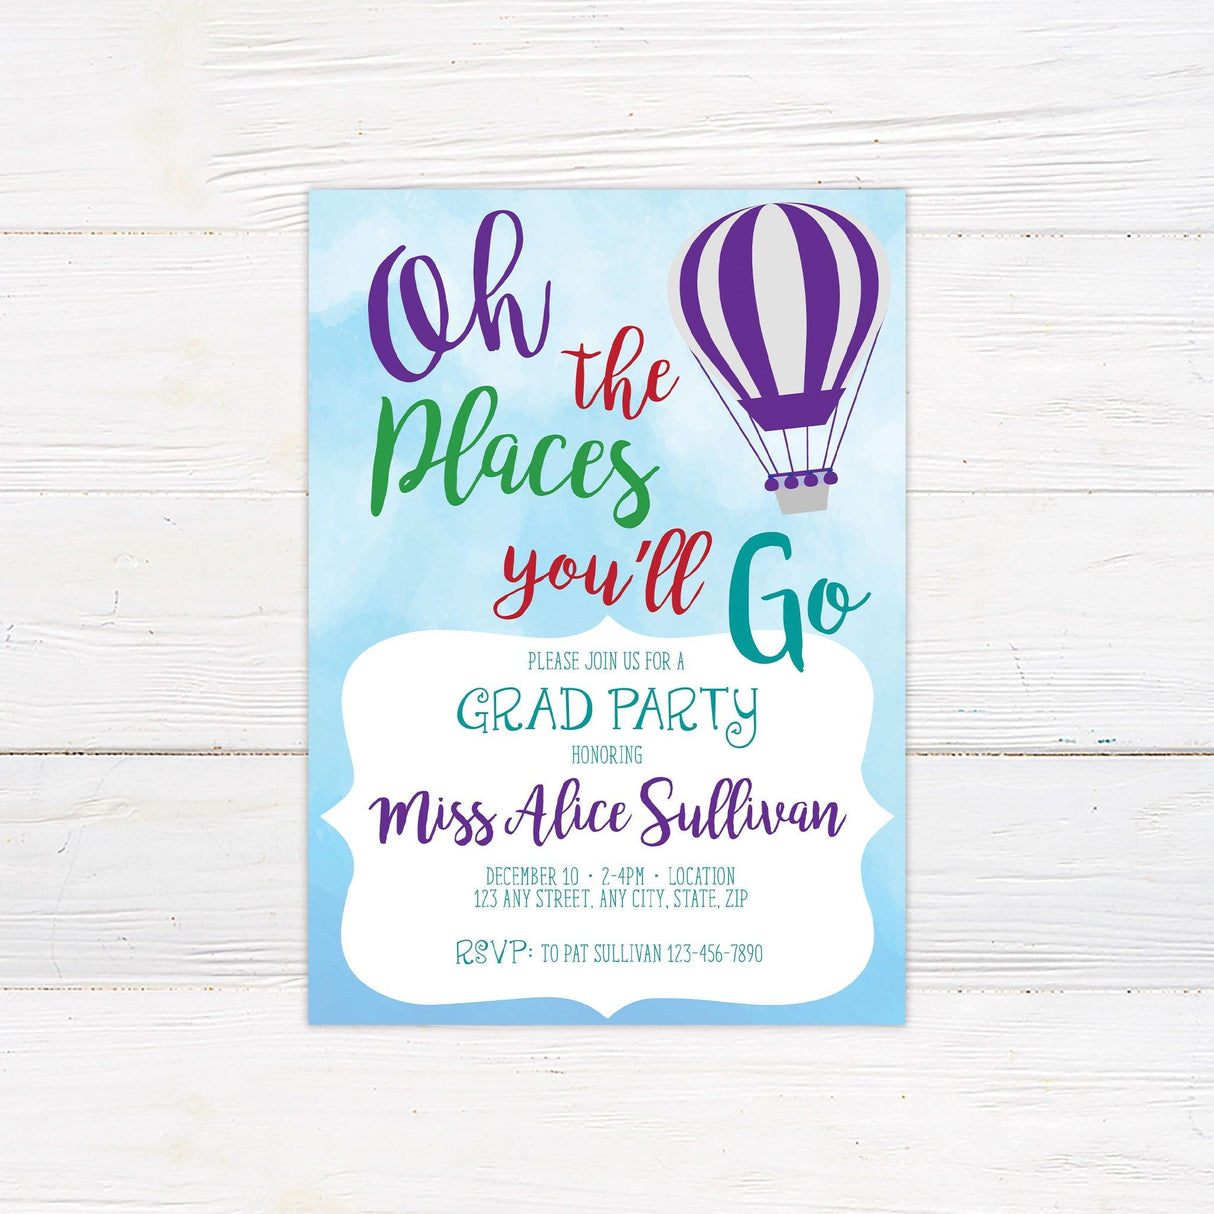 Oh the Places You'll Go - goprintplus